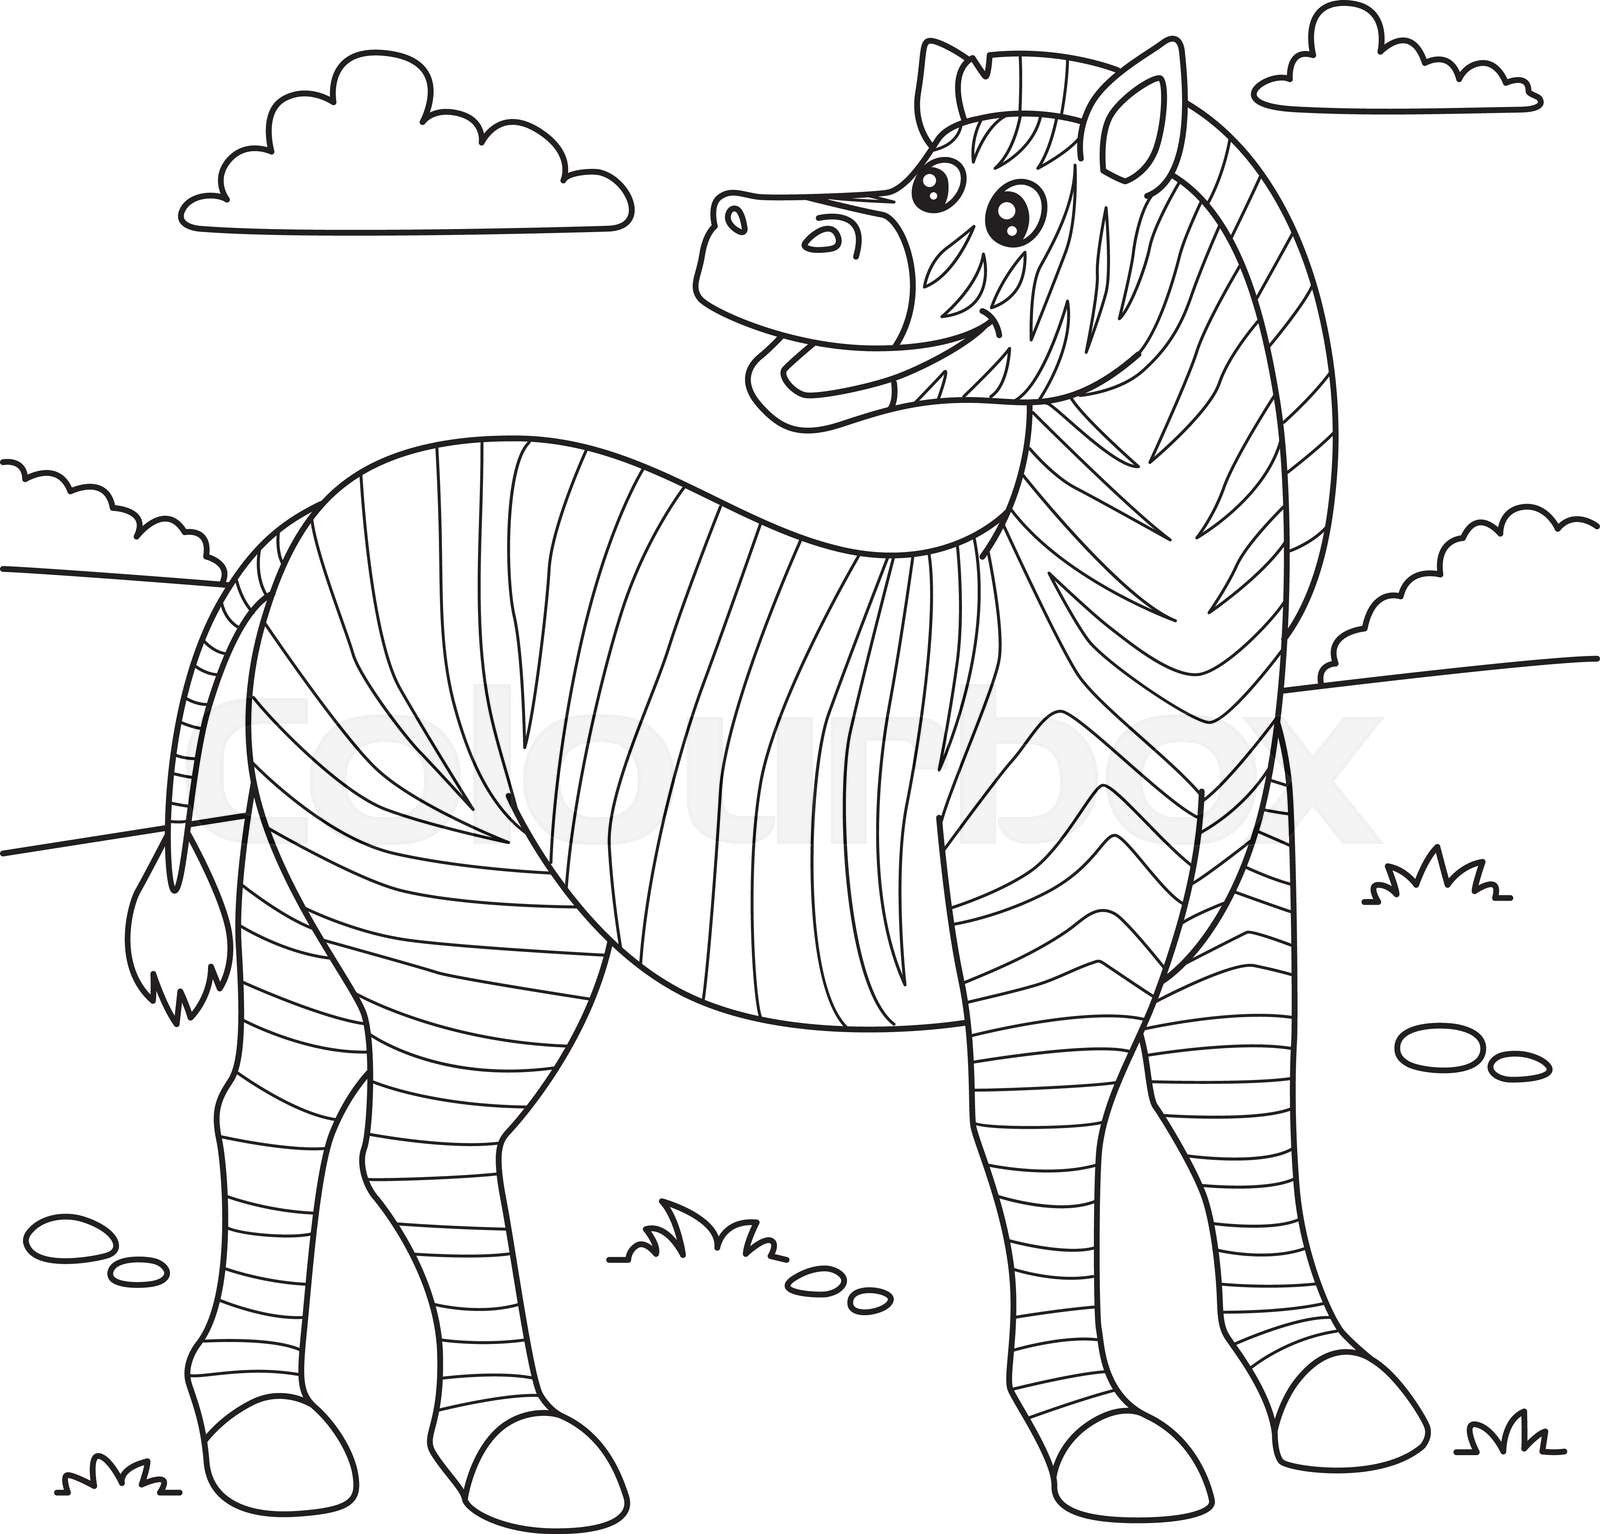 Zebra coloring page for kids stock vector